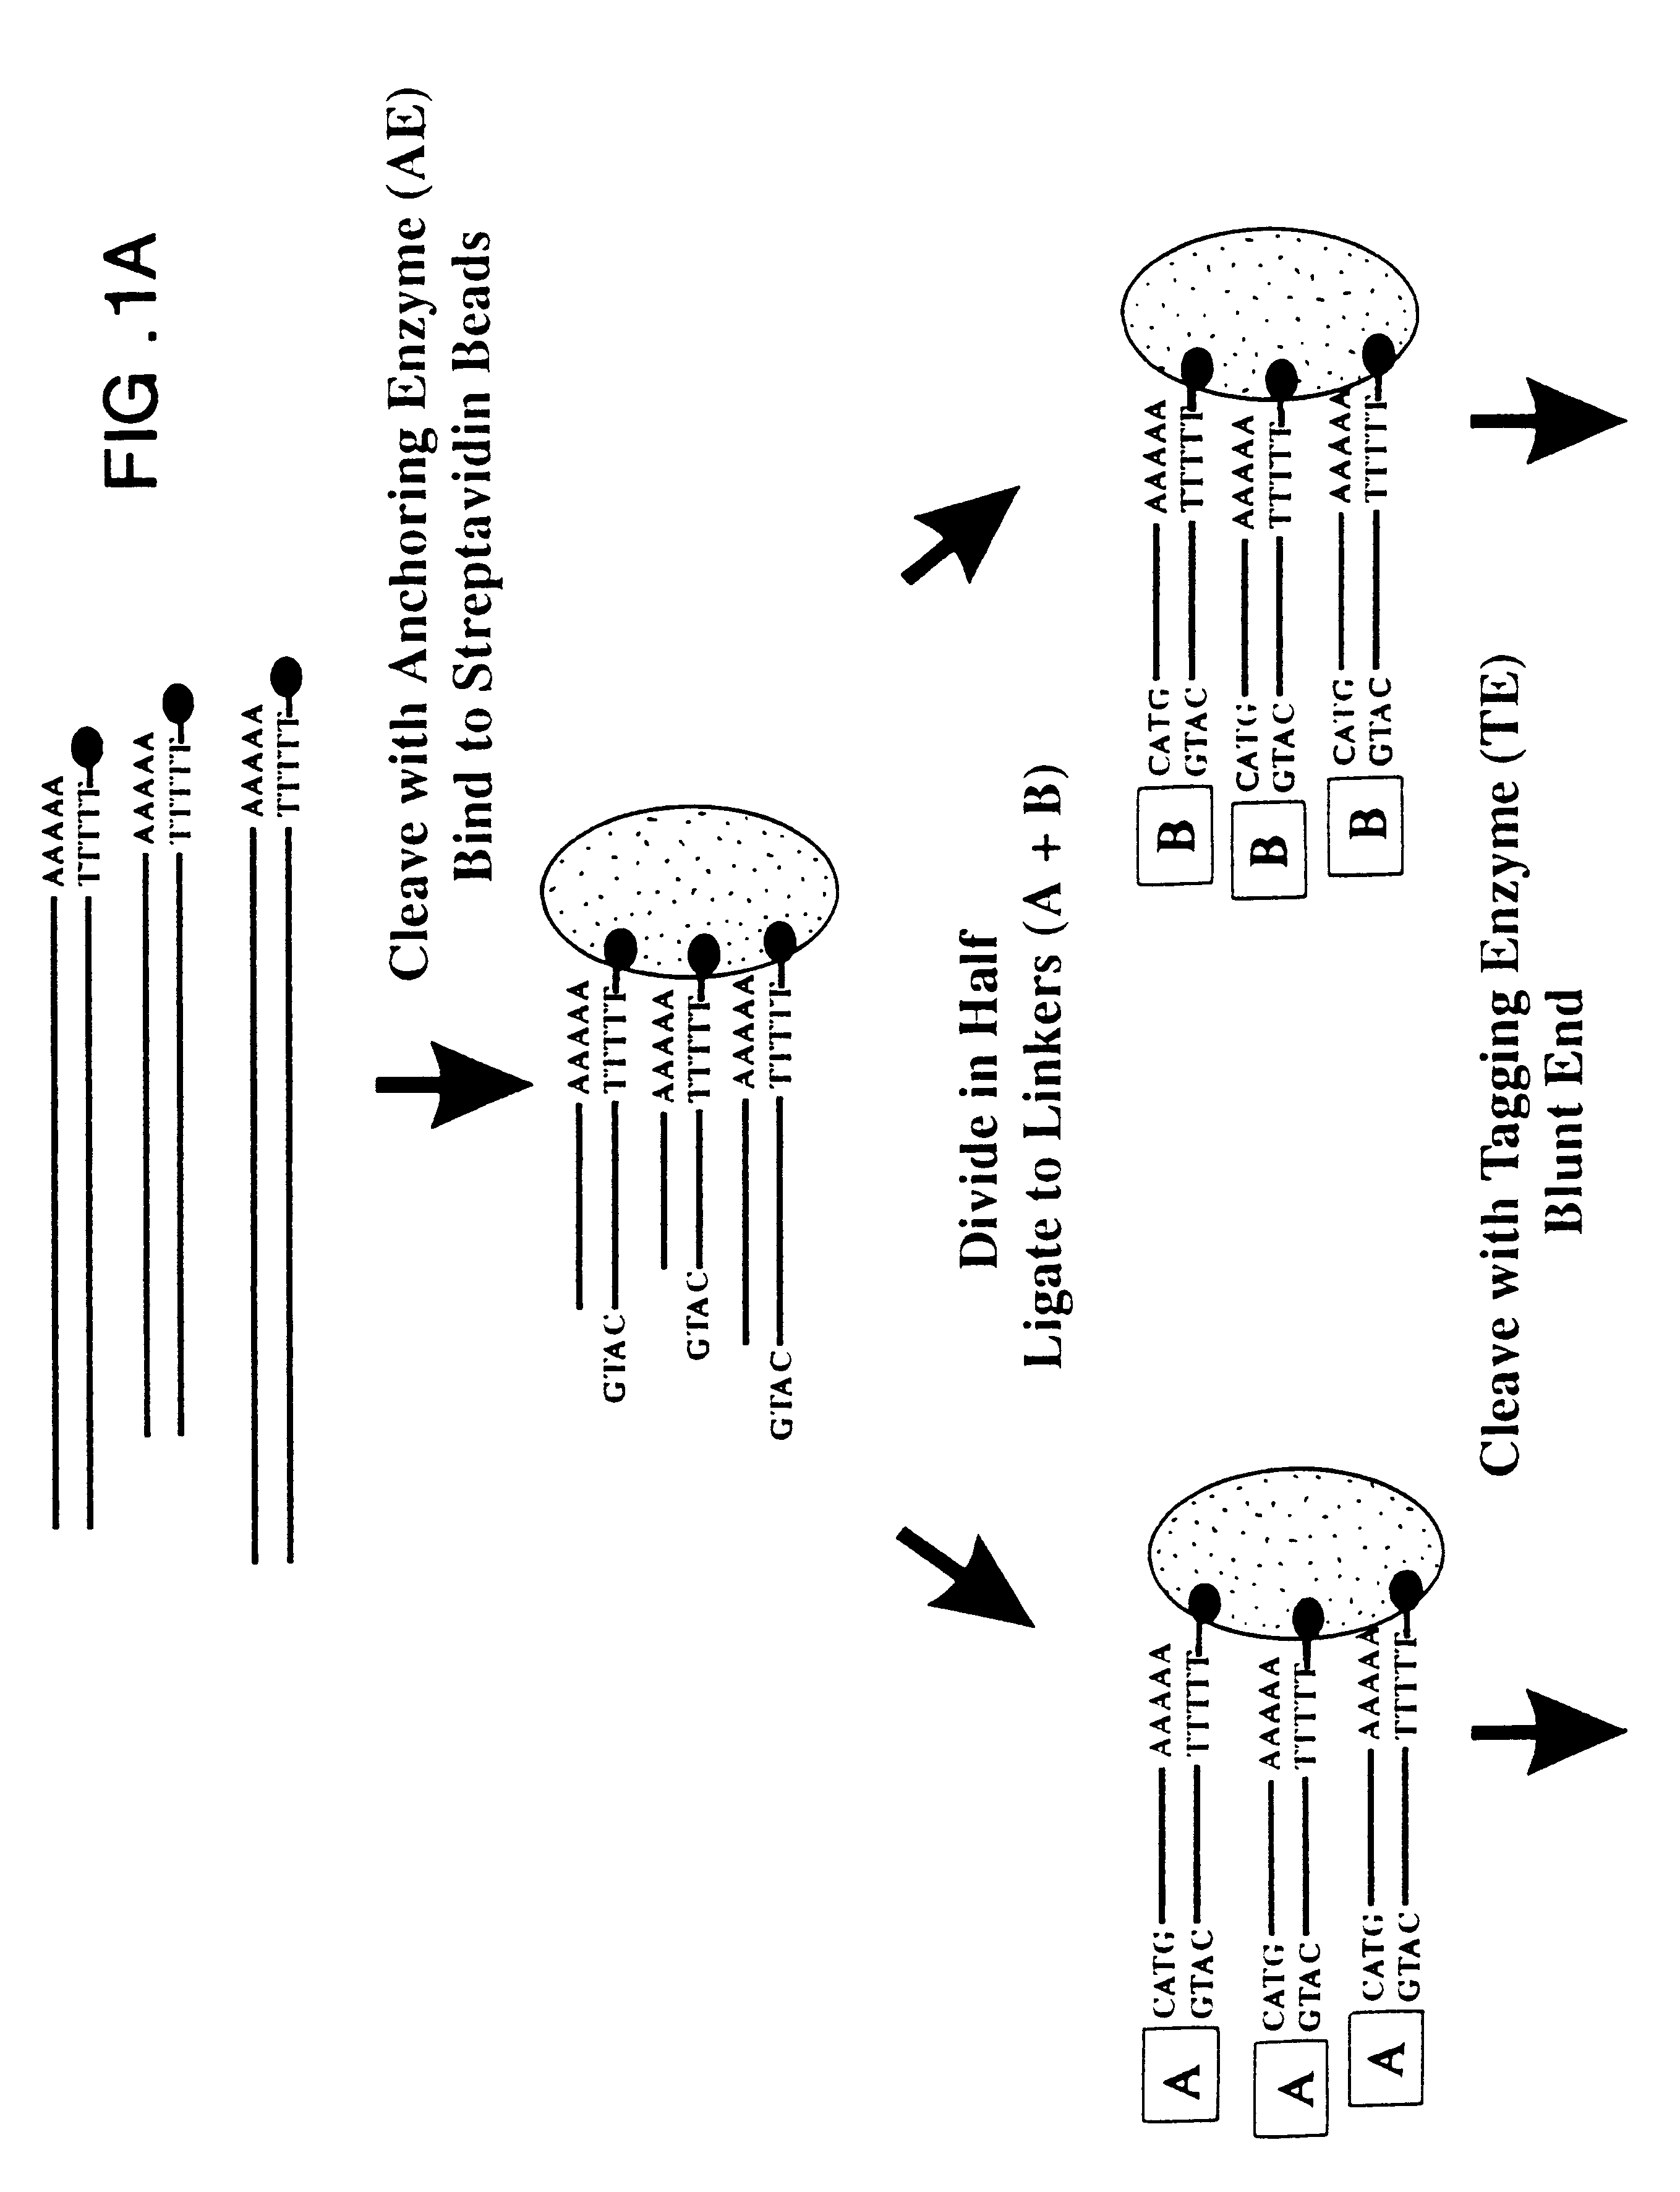 Method for serial analysis of gene expression